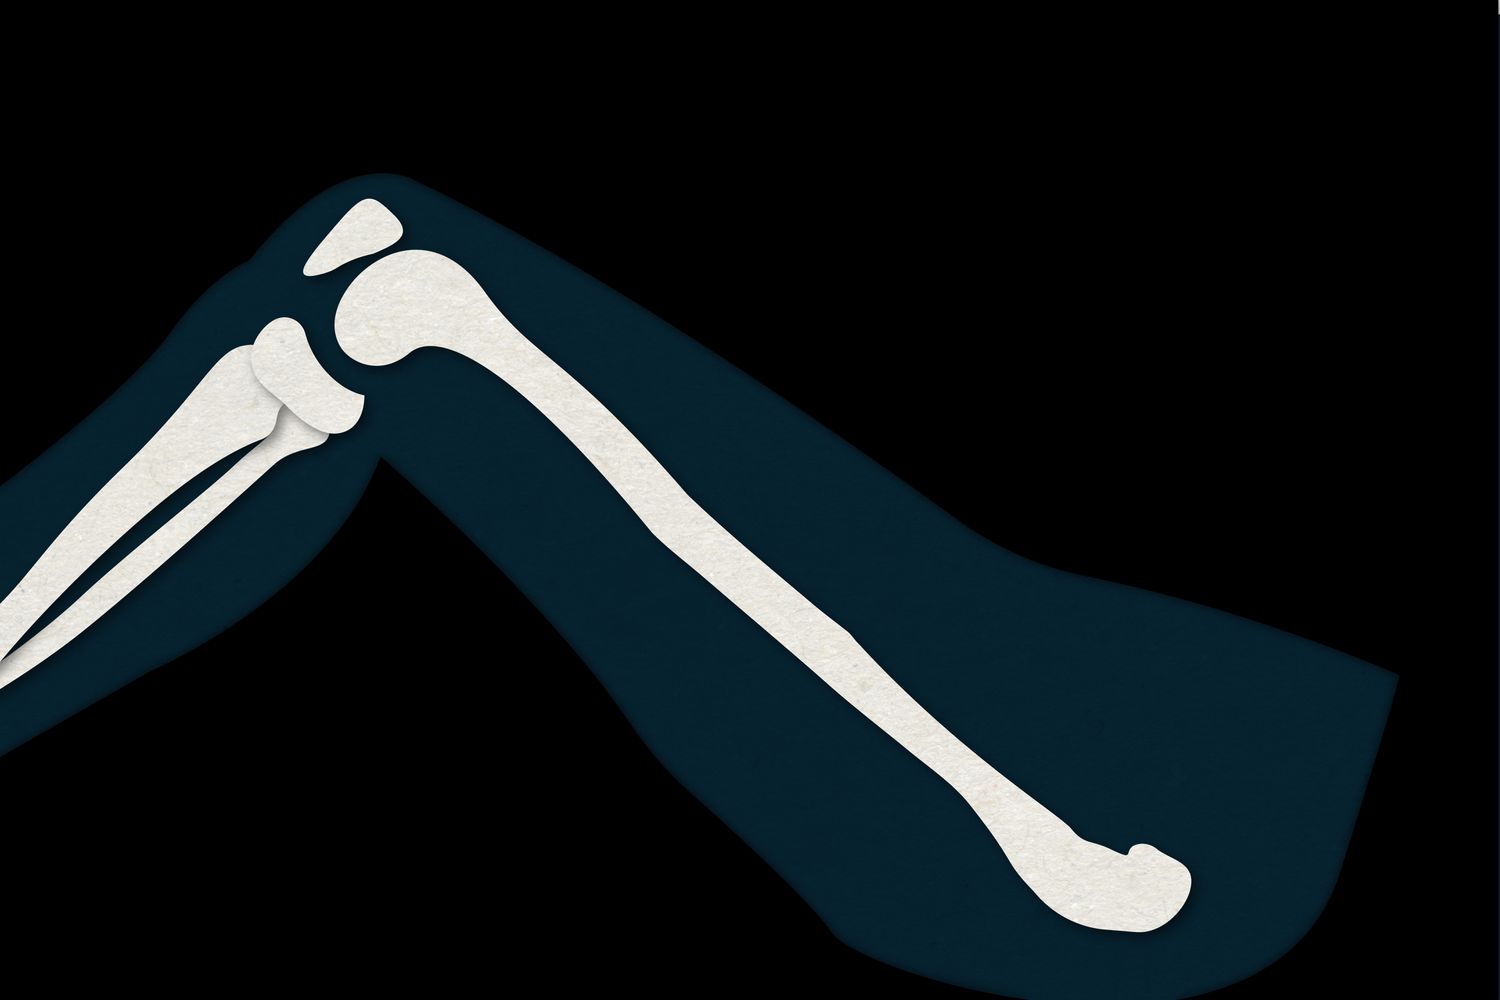 19-fun-facts-about-the-femur